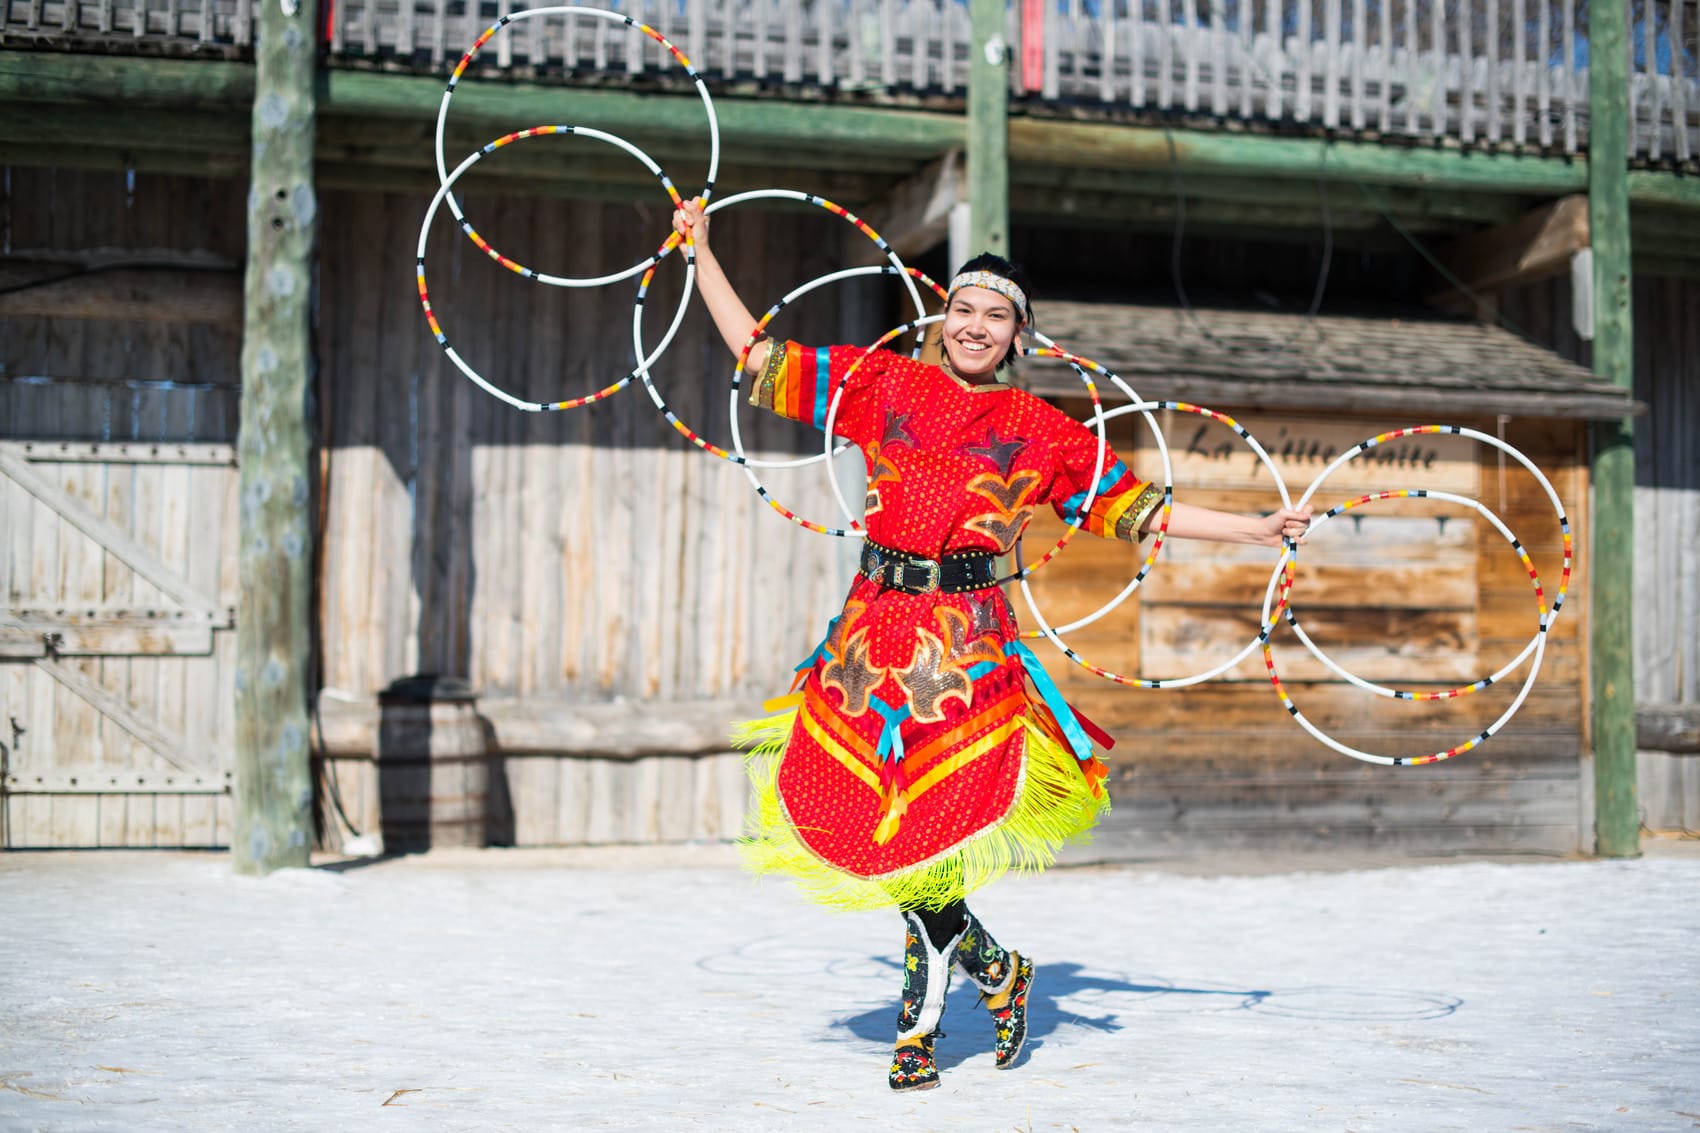 Featured image for “FESTIVAL DU VOYAGEUR WRAPS UP ITS 49TH EDITION”